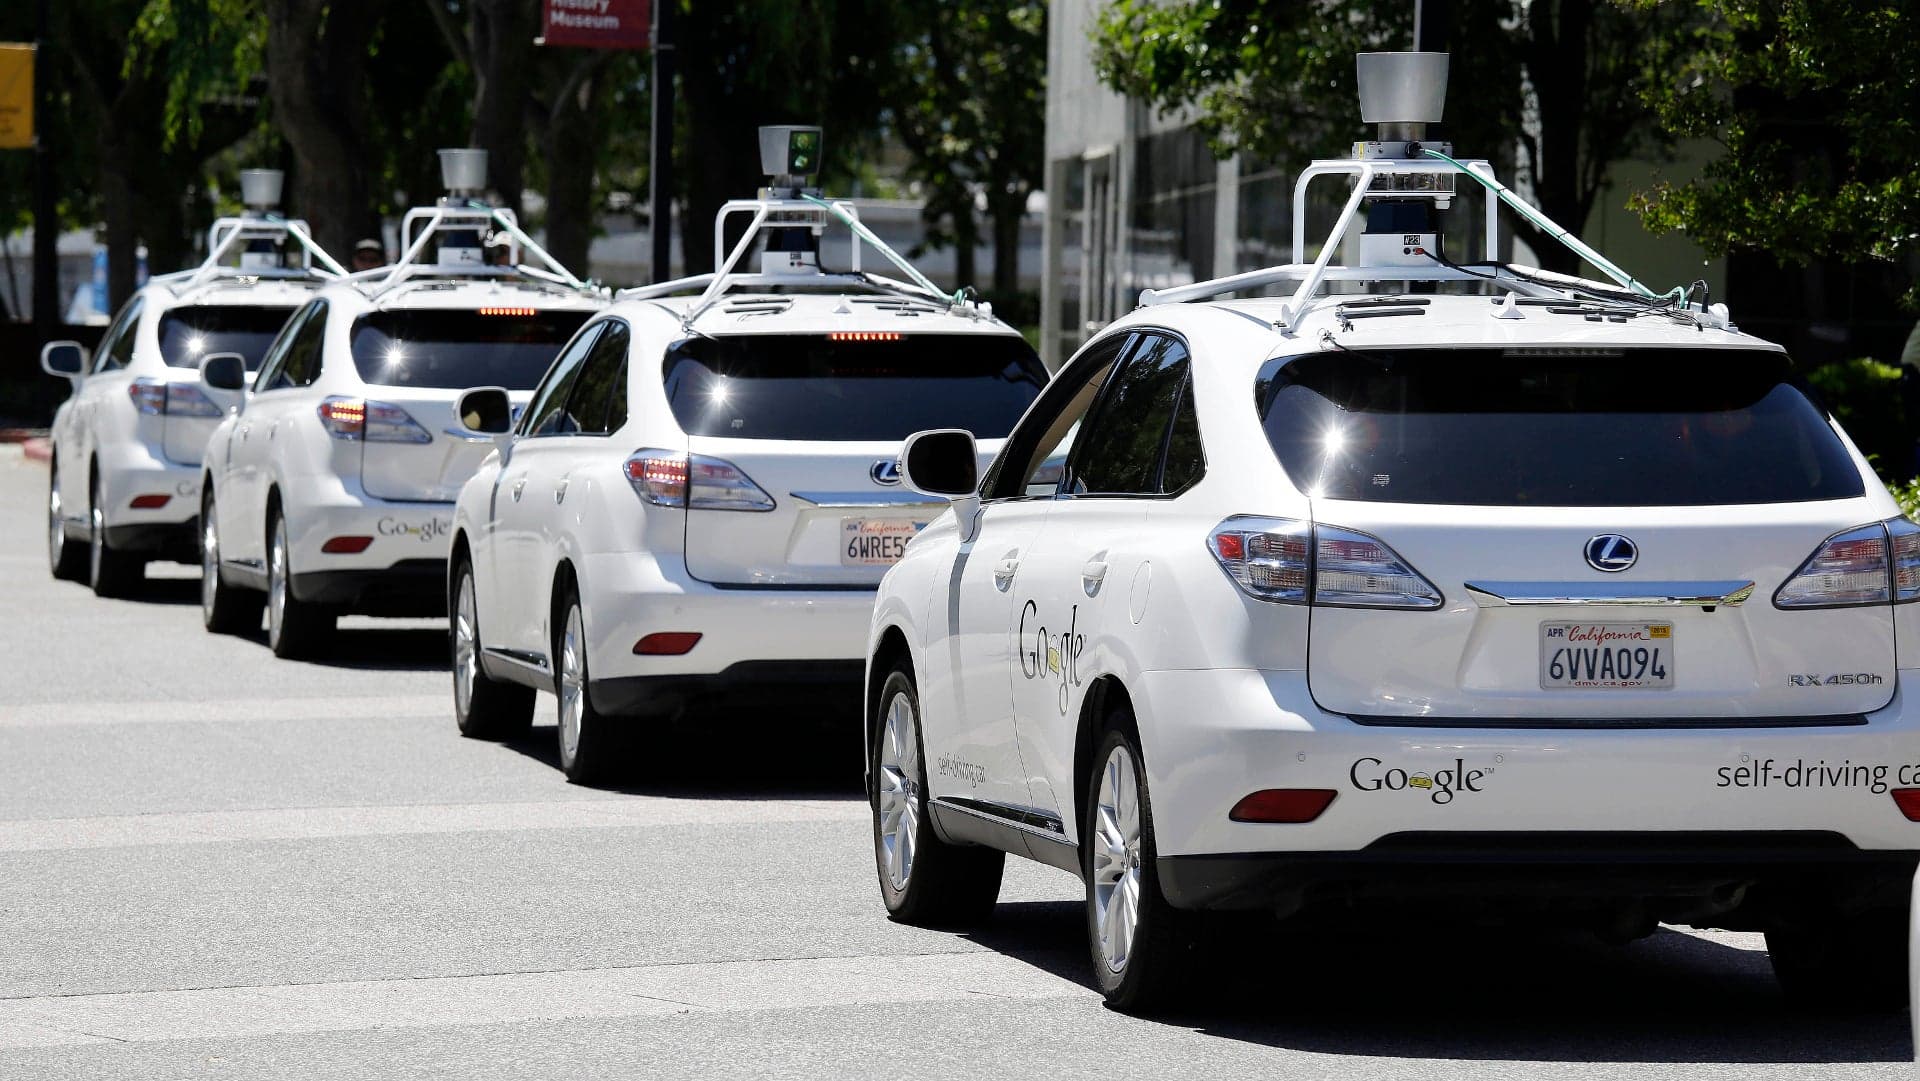 U.S. House Unanimously Passes Bill to Speed Development of Self-Driving Cars